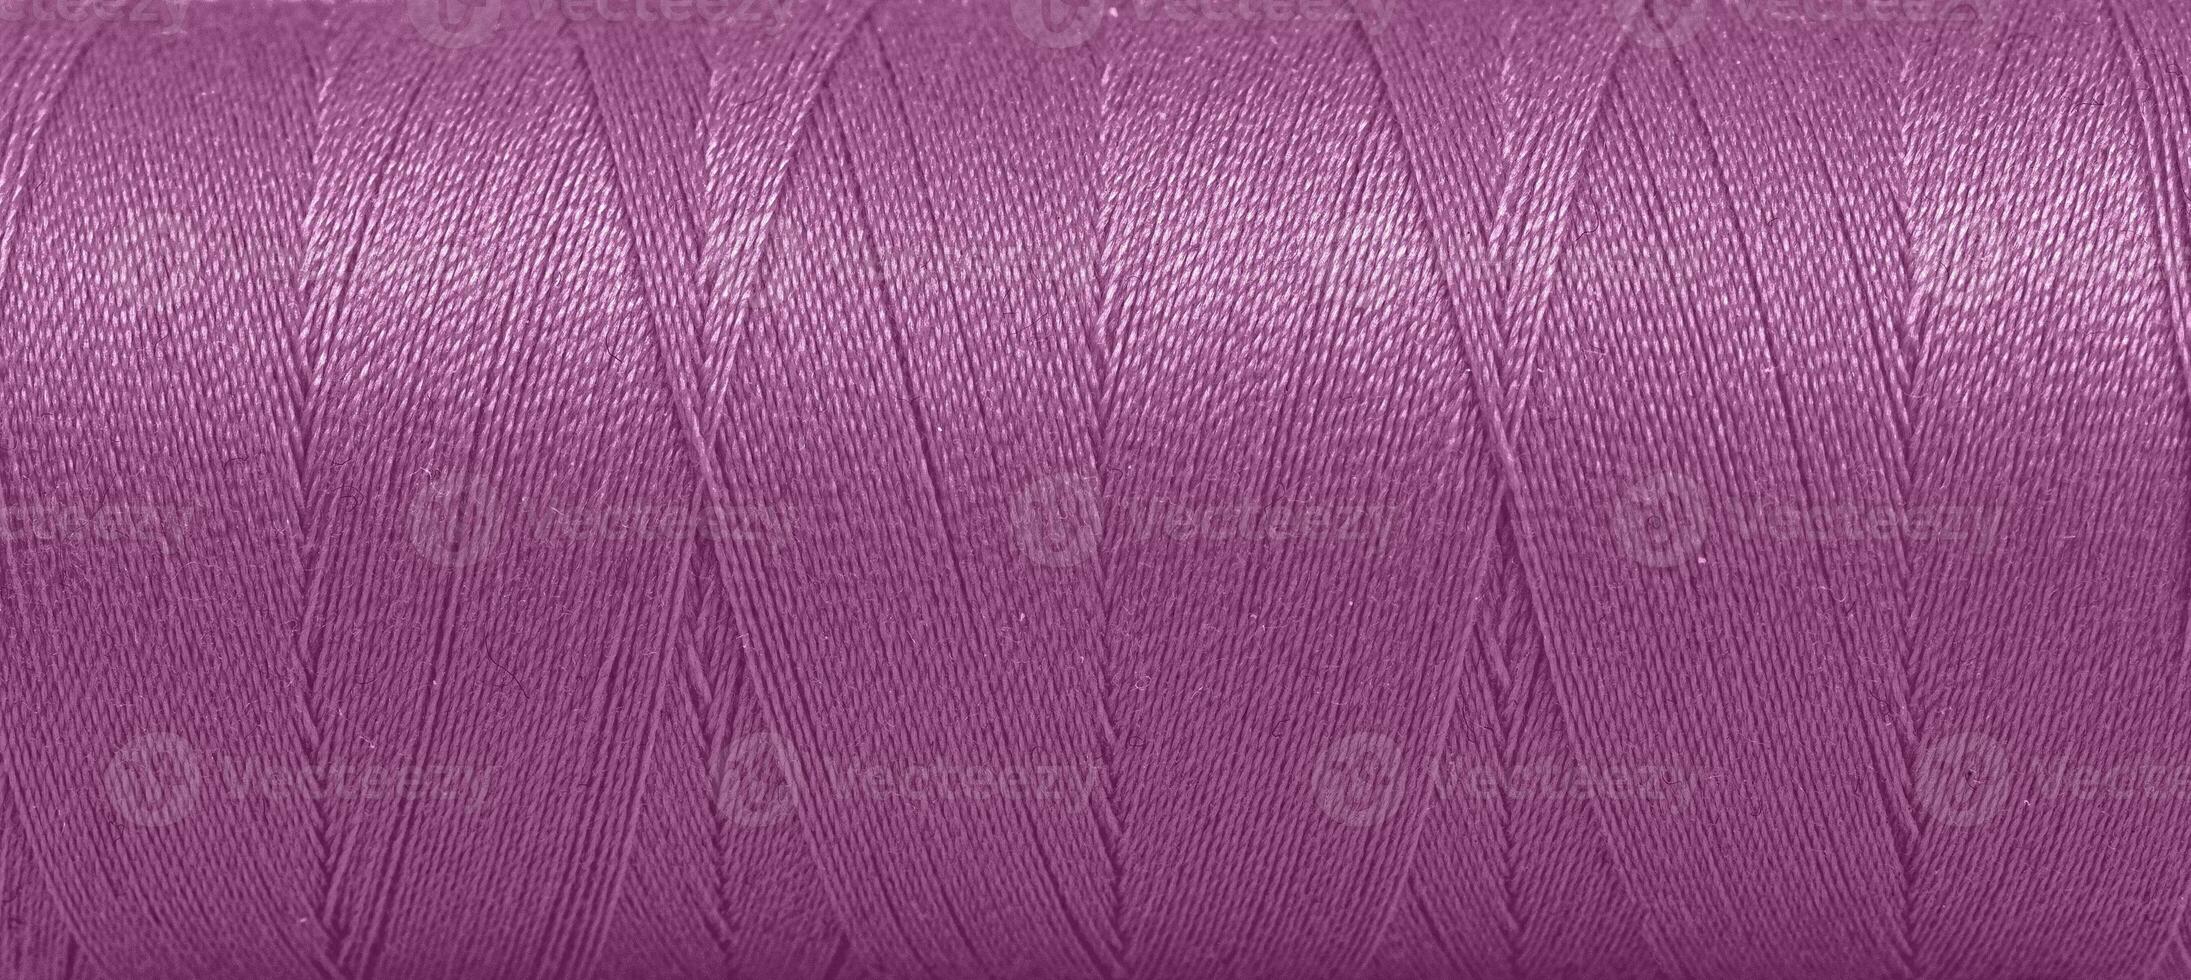 Texture of threads in a spool of purple color on a white background photo